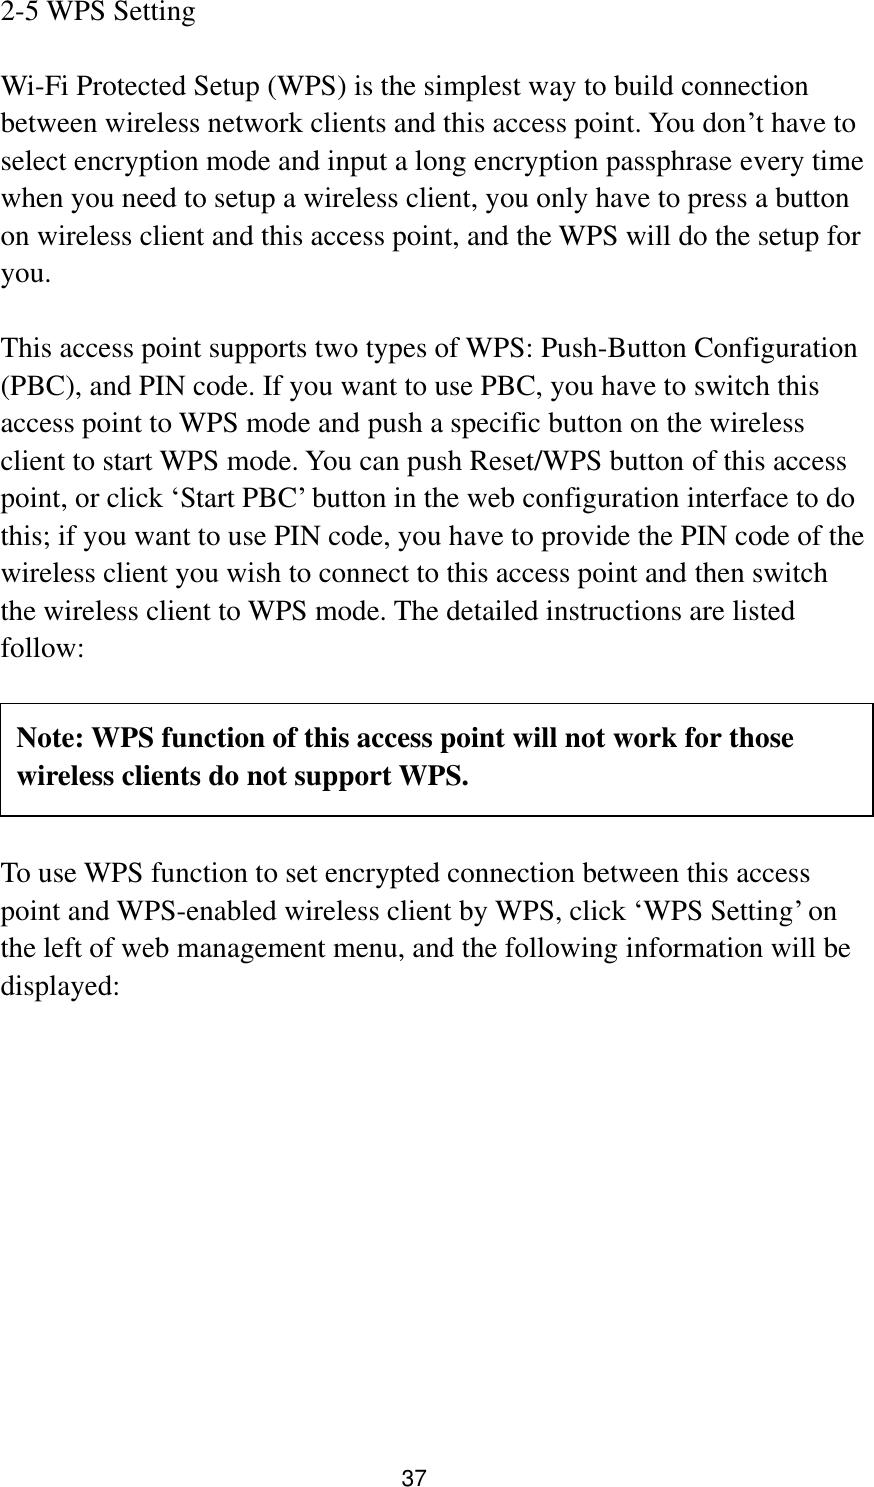 37 2-5 WPS Setting  Wi-Fi Protected Setup (WPS) is the simplest way to build connection between wireless network clients and this access point. You don‟t have to select encryption mode and input a long encryption passphrase every time when you need to setup a wireless client, you only have to press a button on wireless client and this access point, and the WPS will do the setup for you.  This access point supports two types of WPS: Push-Button Configuration (PBC), and PIN code. If you want to use PBC, you have to switch this access point to WPS mode and push a specific button on the wireless client to start WPS mode. You can push Reset/WPS button of this access point, or click „Start PBC‟ button in the web configuration interface to do this; if you want to use PIN code, you have to provide the PIN code of the wireless client you wish to connect to this access point and then switch the wireless client to WPS mode. The detailed instructions are listed follow:      To use WPS function to set encrypted connection between this access point and WPS-enabled wireless client by WPS, click „WPS Setting‟ on the left of web management menu, and the following information will be displayed:  Note: WPS function of this access point will not work for those wireless clients do not support WPS. 